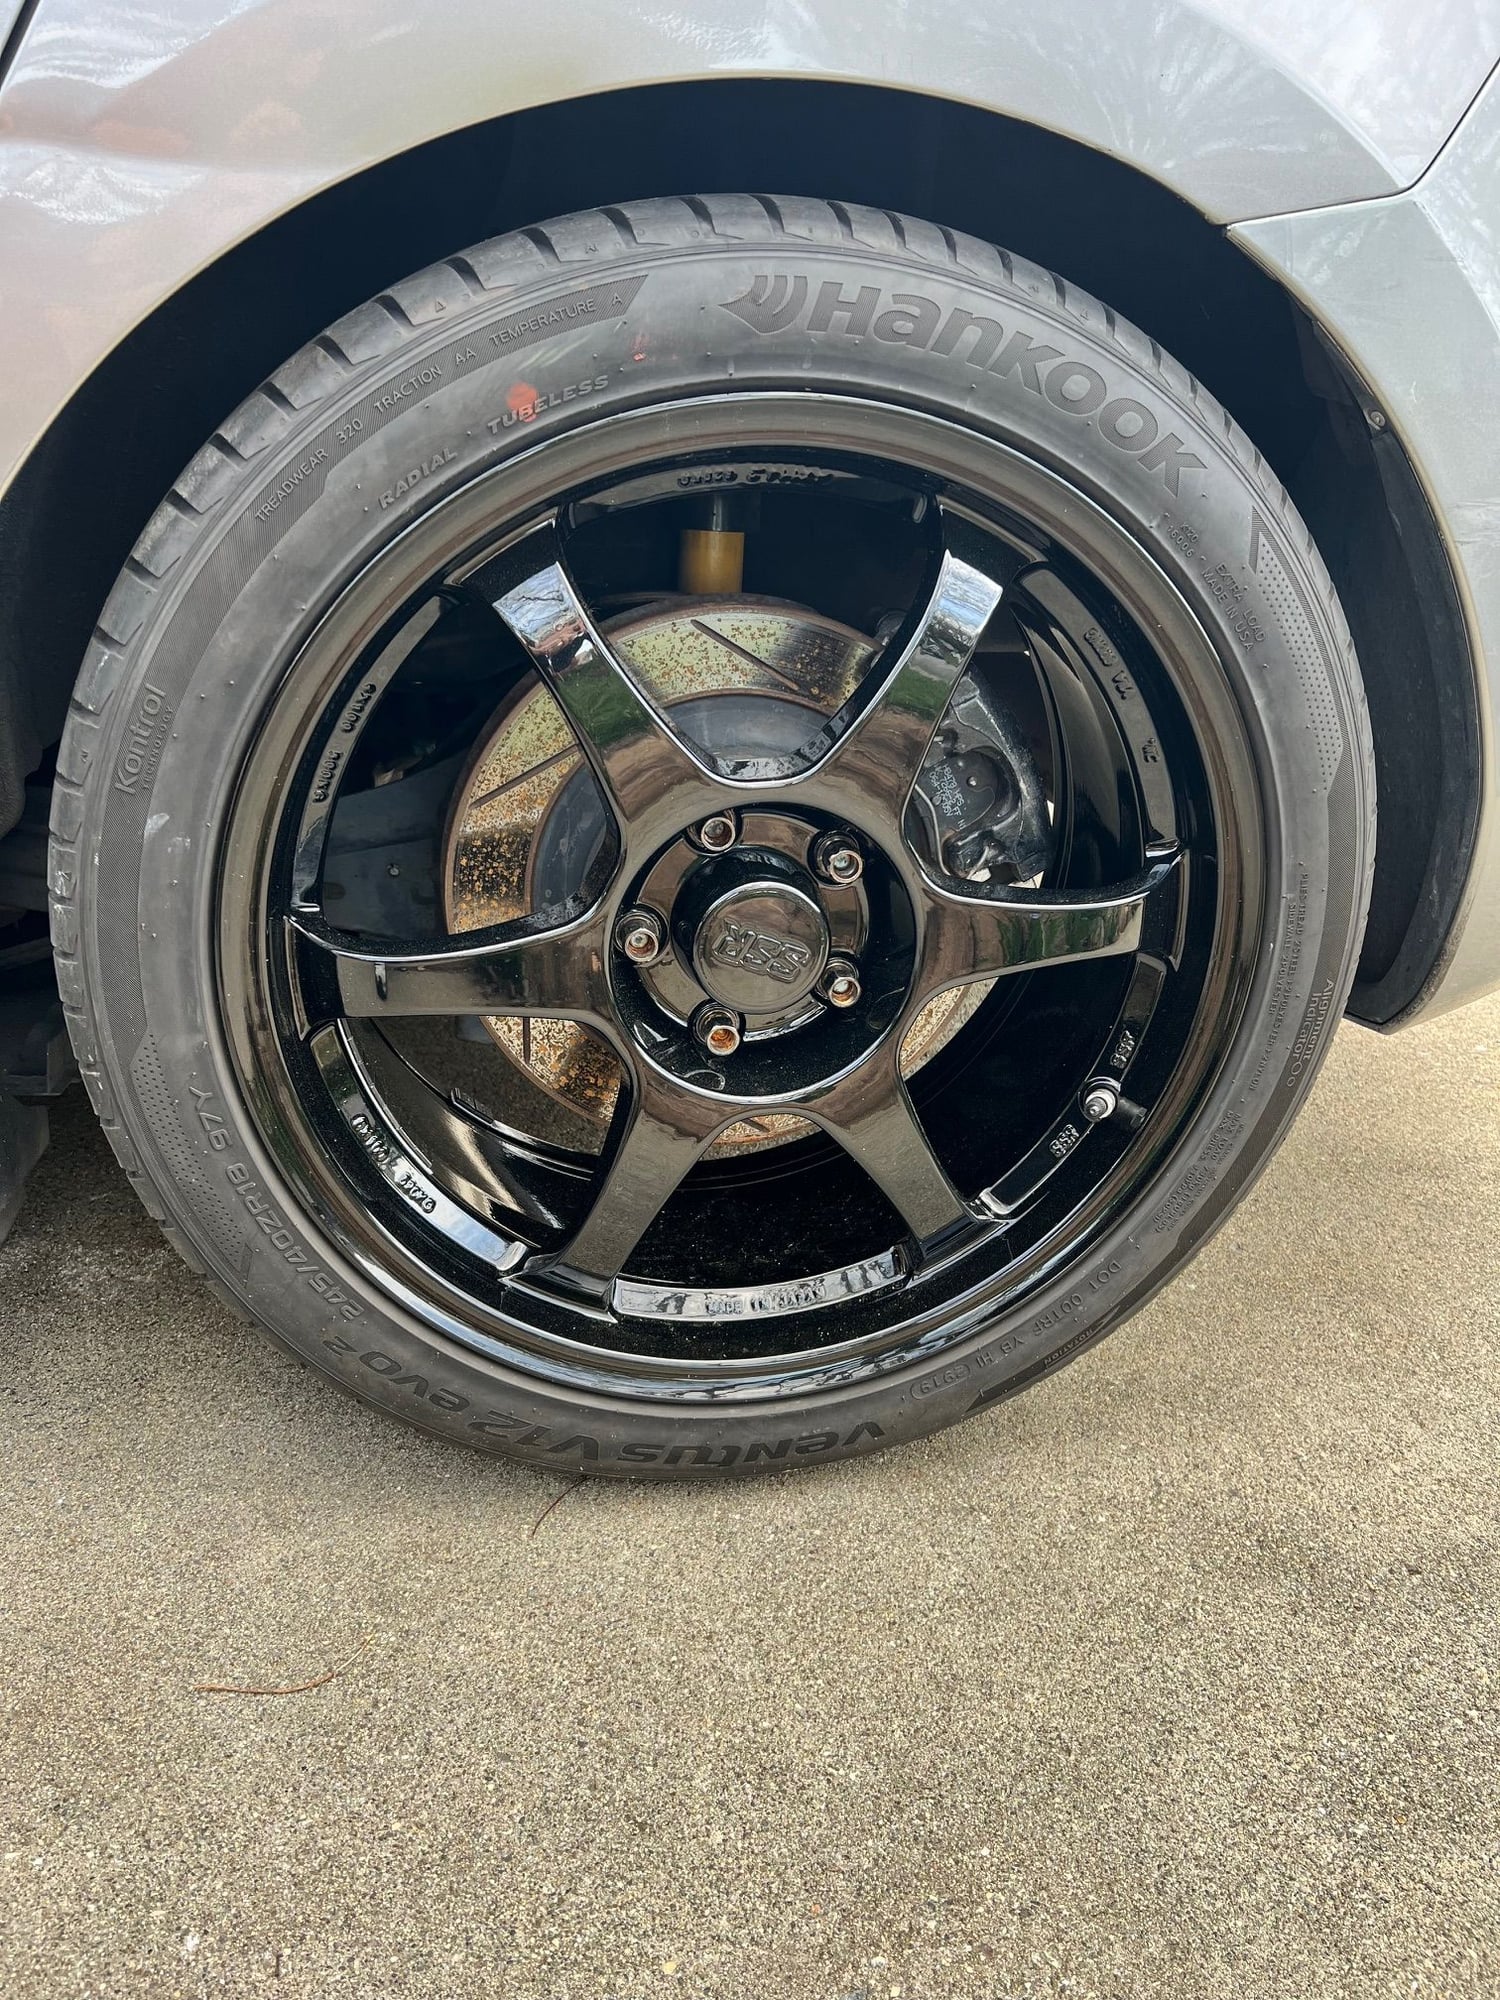 Wheels and Tires/Axles - SSR Type-C 18x8.5 +42 (SSF) - New - 0  All Models - Monterey, CA 93940, United States